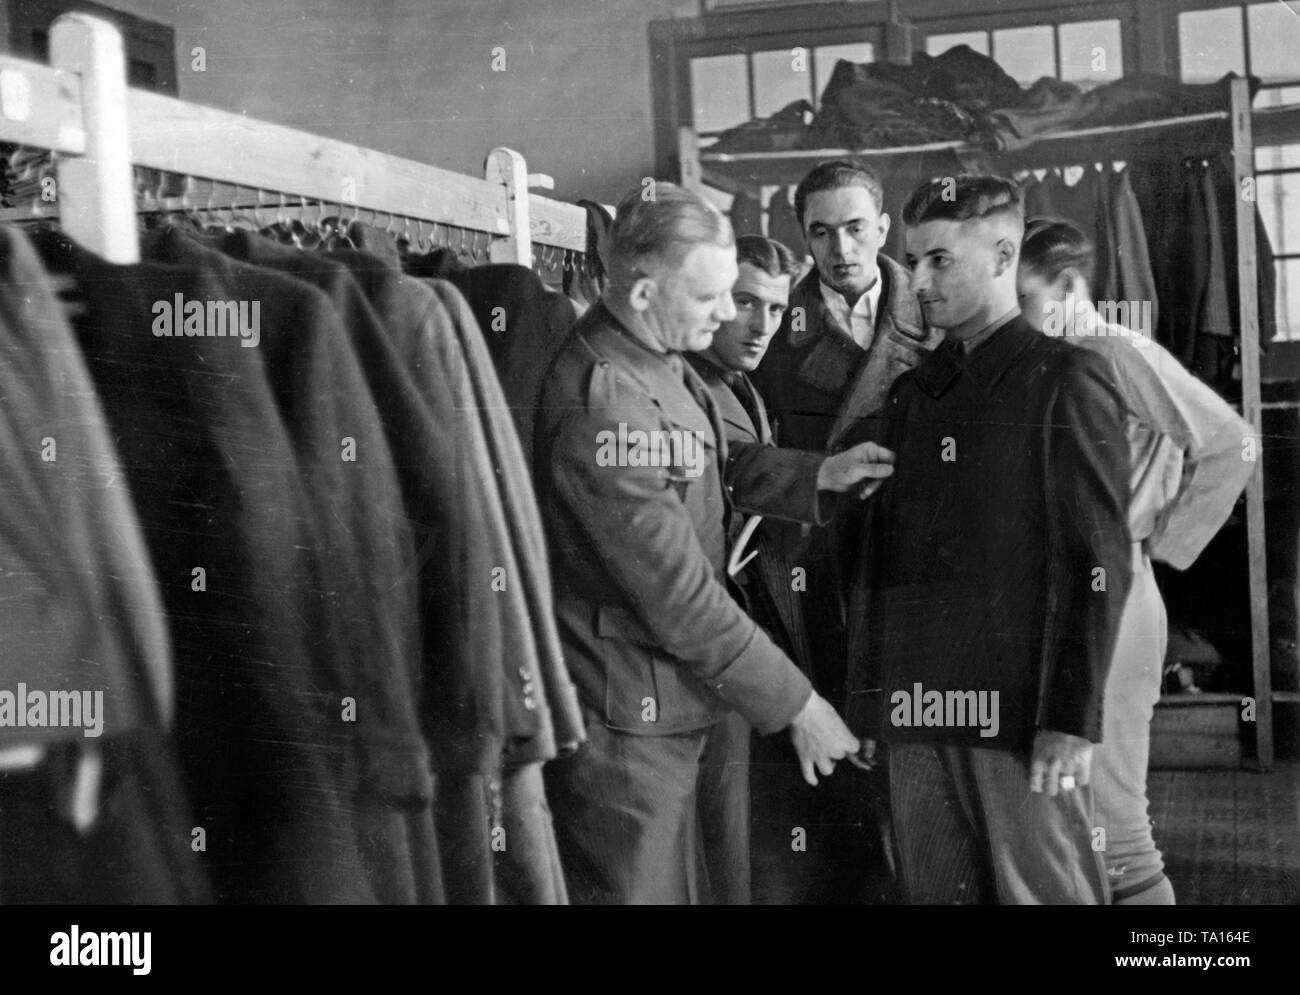 After the end of the Spanish Civil War (April 1939), soldiers of the Wehrmacht of the Condor legion were given civilian clothing by their comrades on their return to Germany in May 1939. A soldier is adjusting a jacket to a comrade. Behind, there are other soldiers standing. On the left, jackets and coats hanging on the clothes rail. Stock Photo